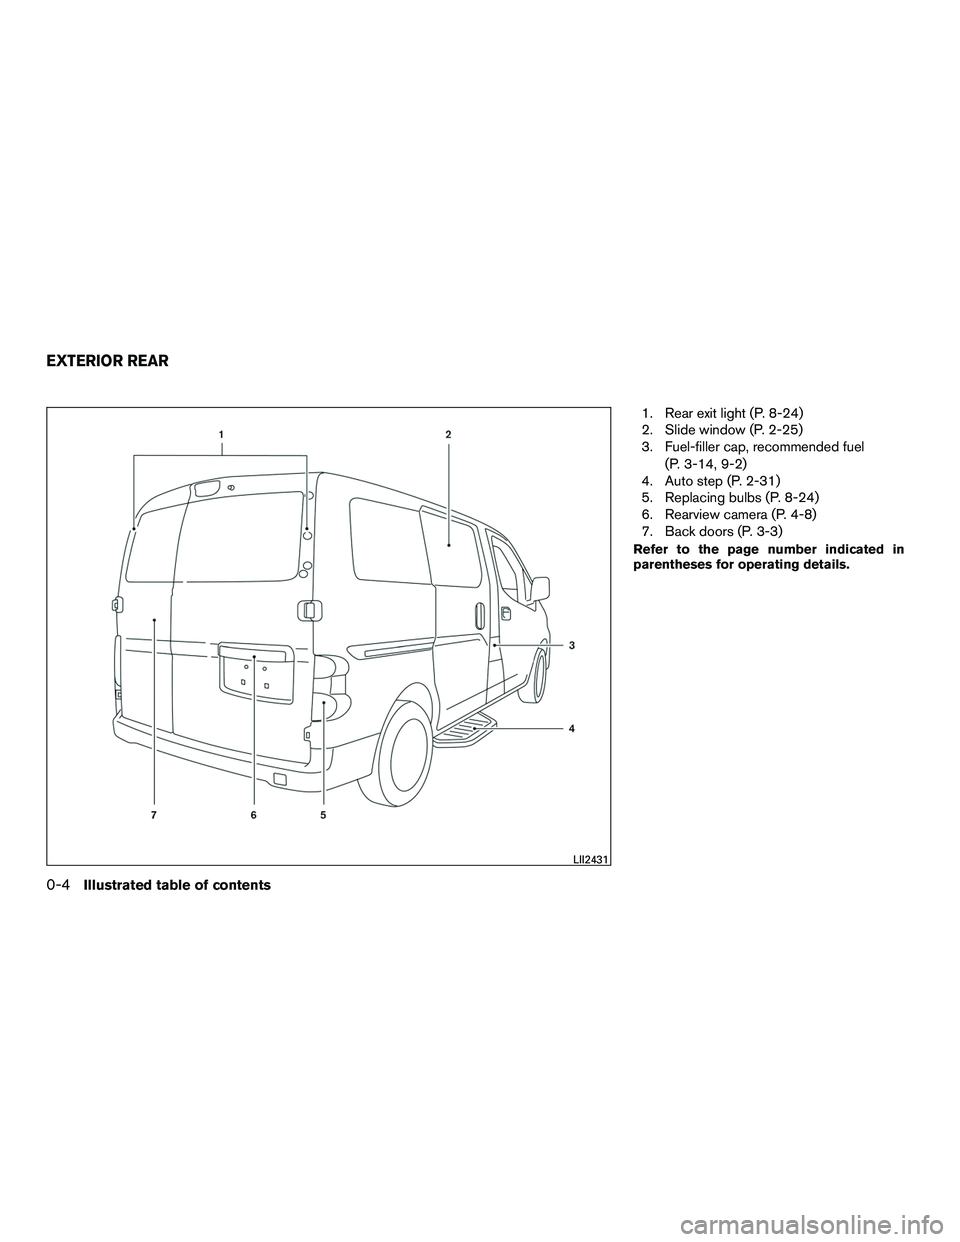 NISSAN NV200 2016  Owners Manual 1. Rear exit light (P. 8-24)
2. Slide window (P. 2-25)
3. Fuel-filler cap, recommended fuel(P. 3-14, 9-2)
4. Auto step (P. 2-31)
5. Replacing bulbs (P. 8-24)
6. Rearview camera (P. 4-8)
7. Back doors 